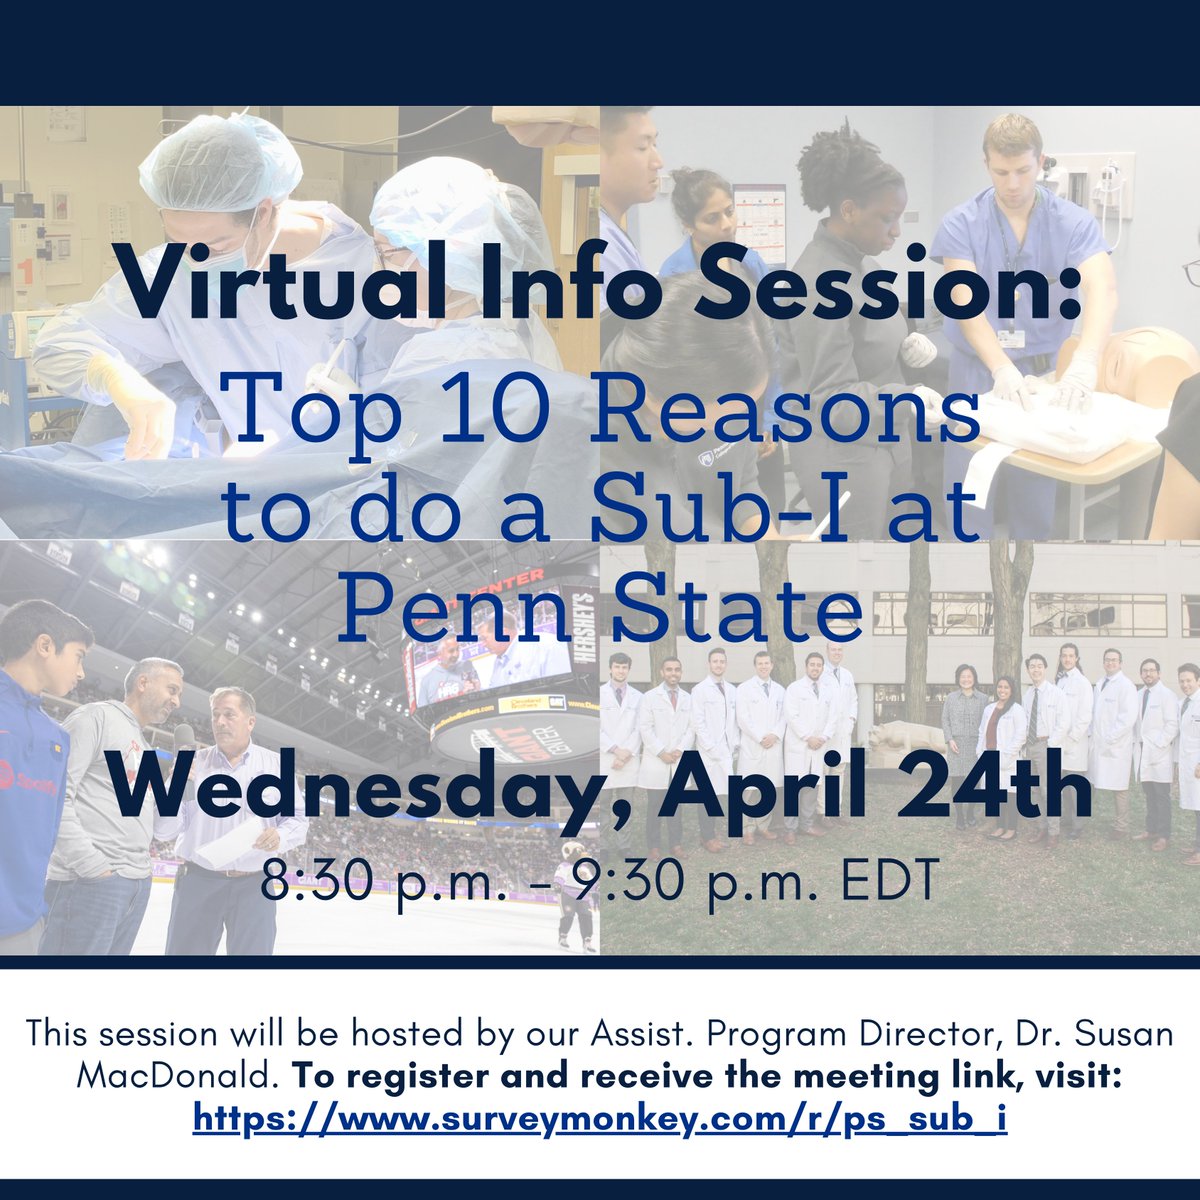 Thinking about doing a Sub-I rotation with us at @PennStHershey? Assist. program director, @smacdonald_md, is hosting a virtual info session on April 24 @ 8:30 pm EDT! To receive the link, register at bit.ly/4b24XQU. Block dates are flexible! Questions? Send us a DM!